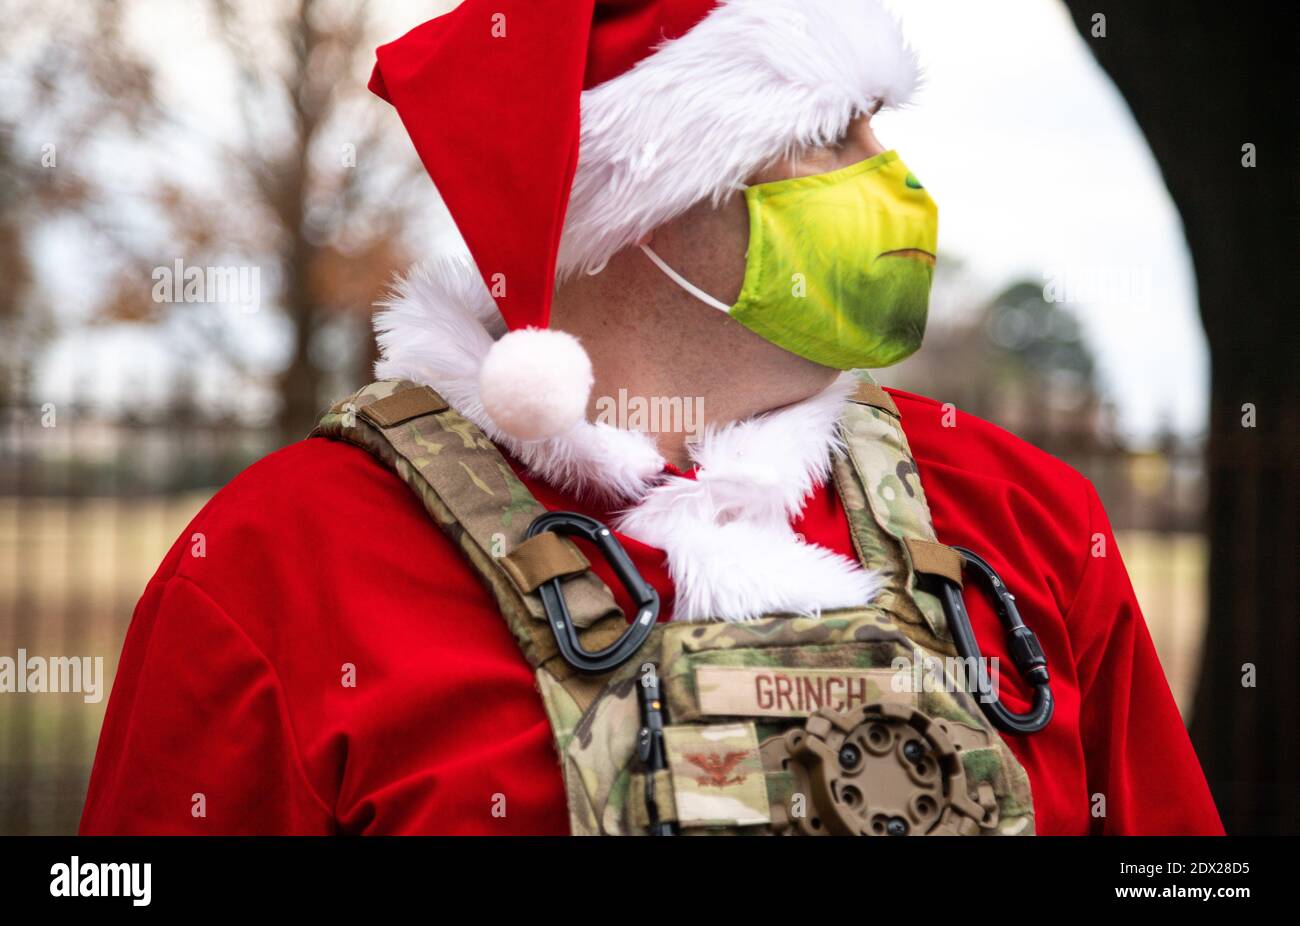 Bossier City, Louisiana, USA. 23rd Dec 2020. U.S. Air Force Col. Mark Dmytryszyn, 2nd Bomb Wing commander, wears a Grinch costume to celebrate the holiday spirit at Barksdale Air Force Base December 23, 2020 in Bossier City, Louisiana. Credit: Planetpix/Alamy Live News Stock Photo